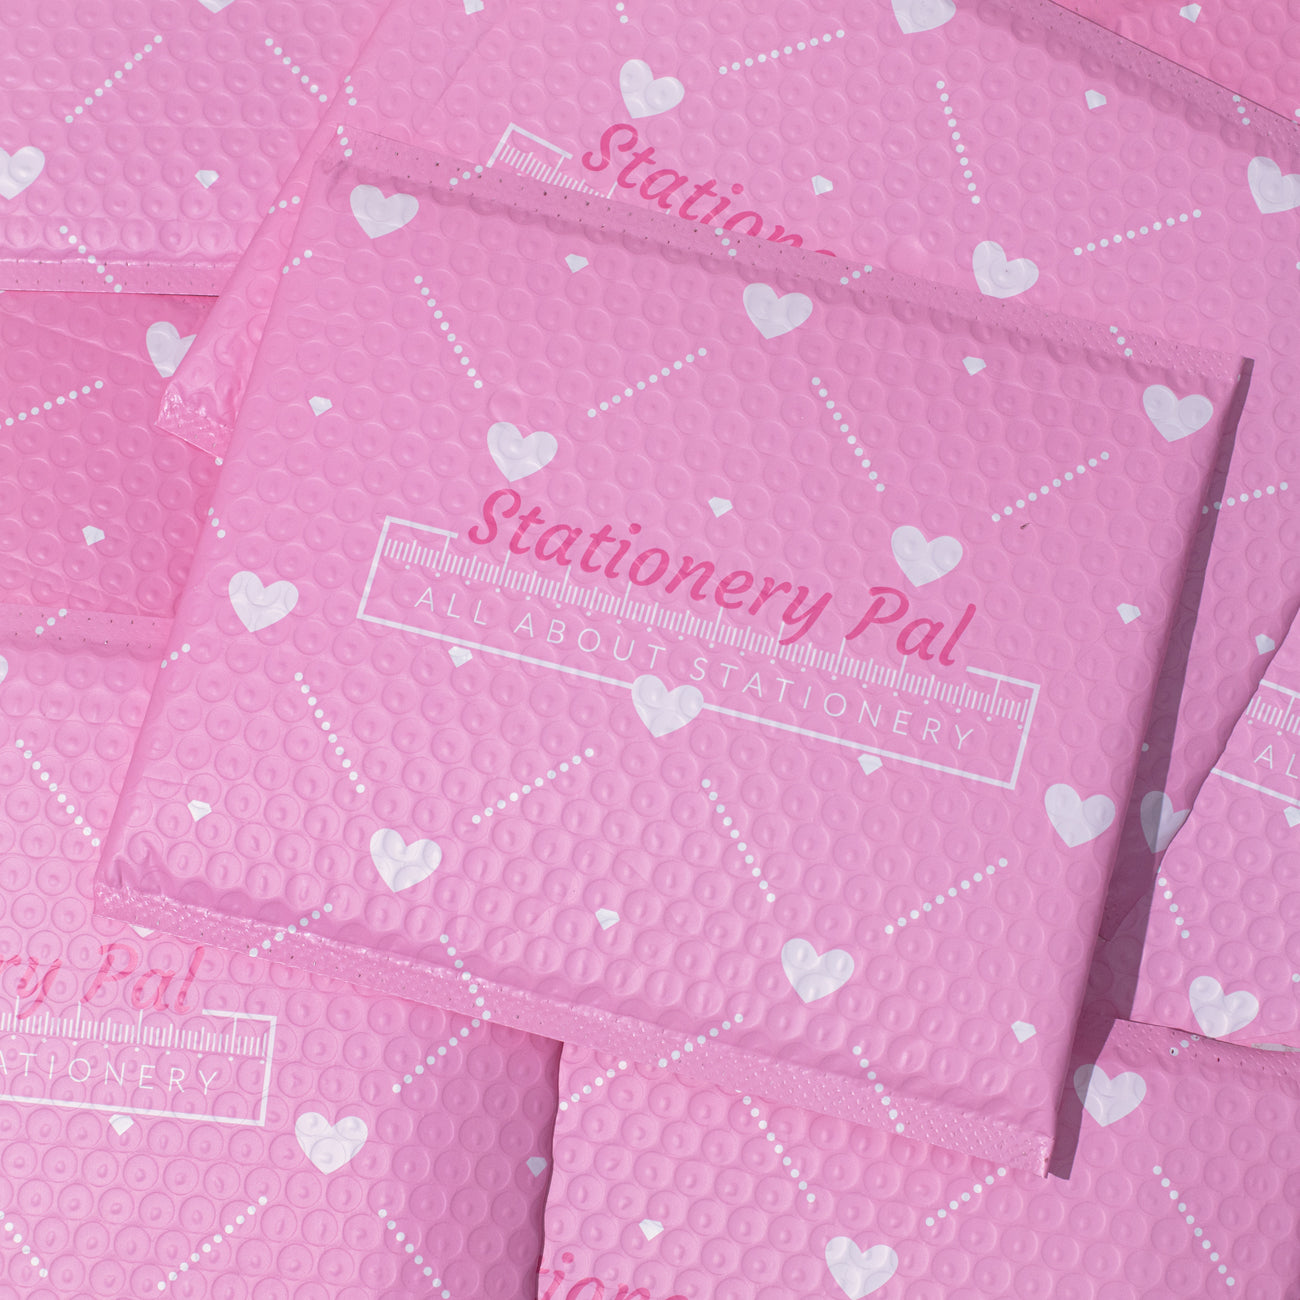 Stationery Pal New Pink Bubble Envelope Looks!